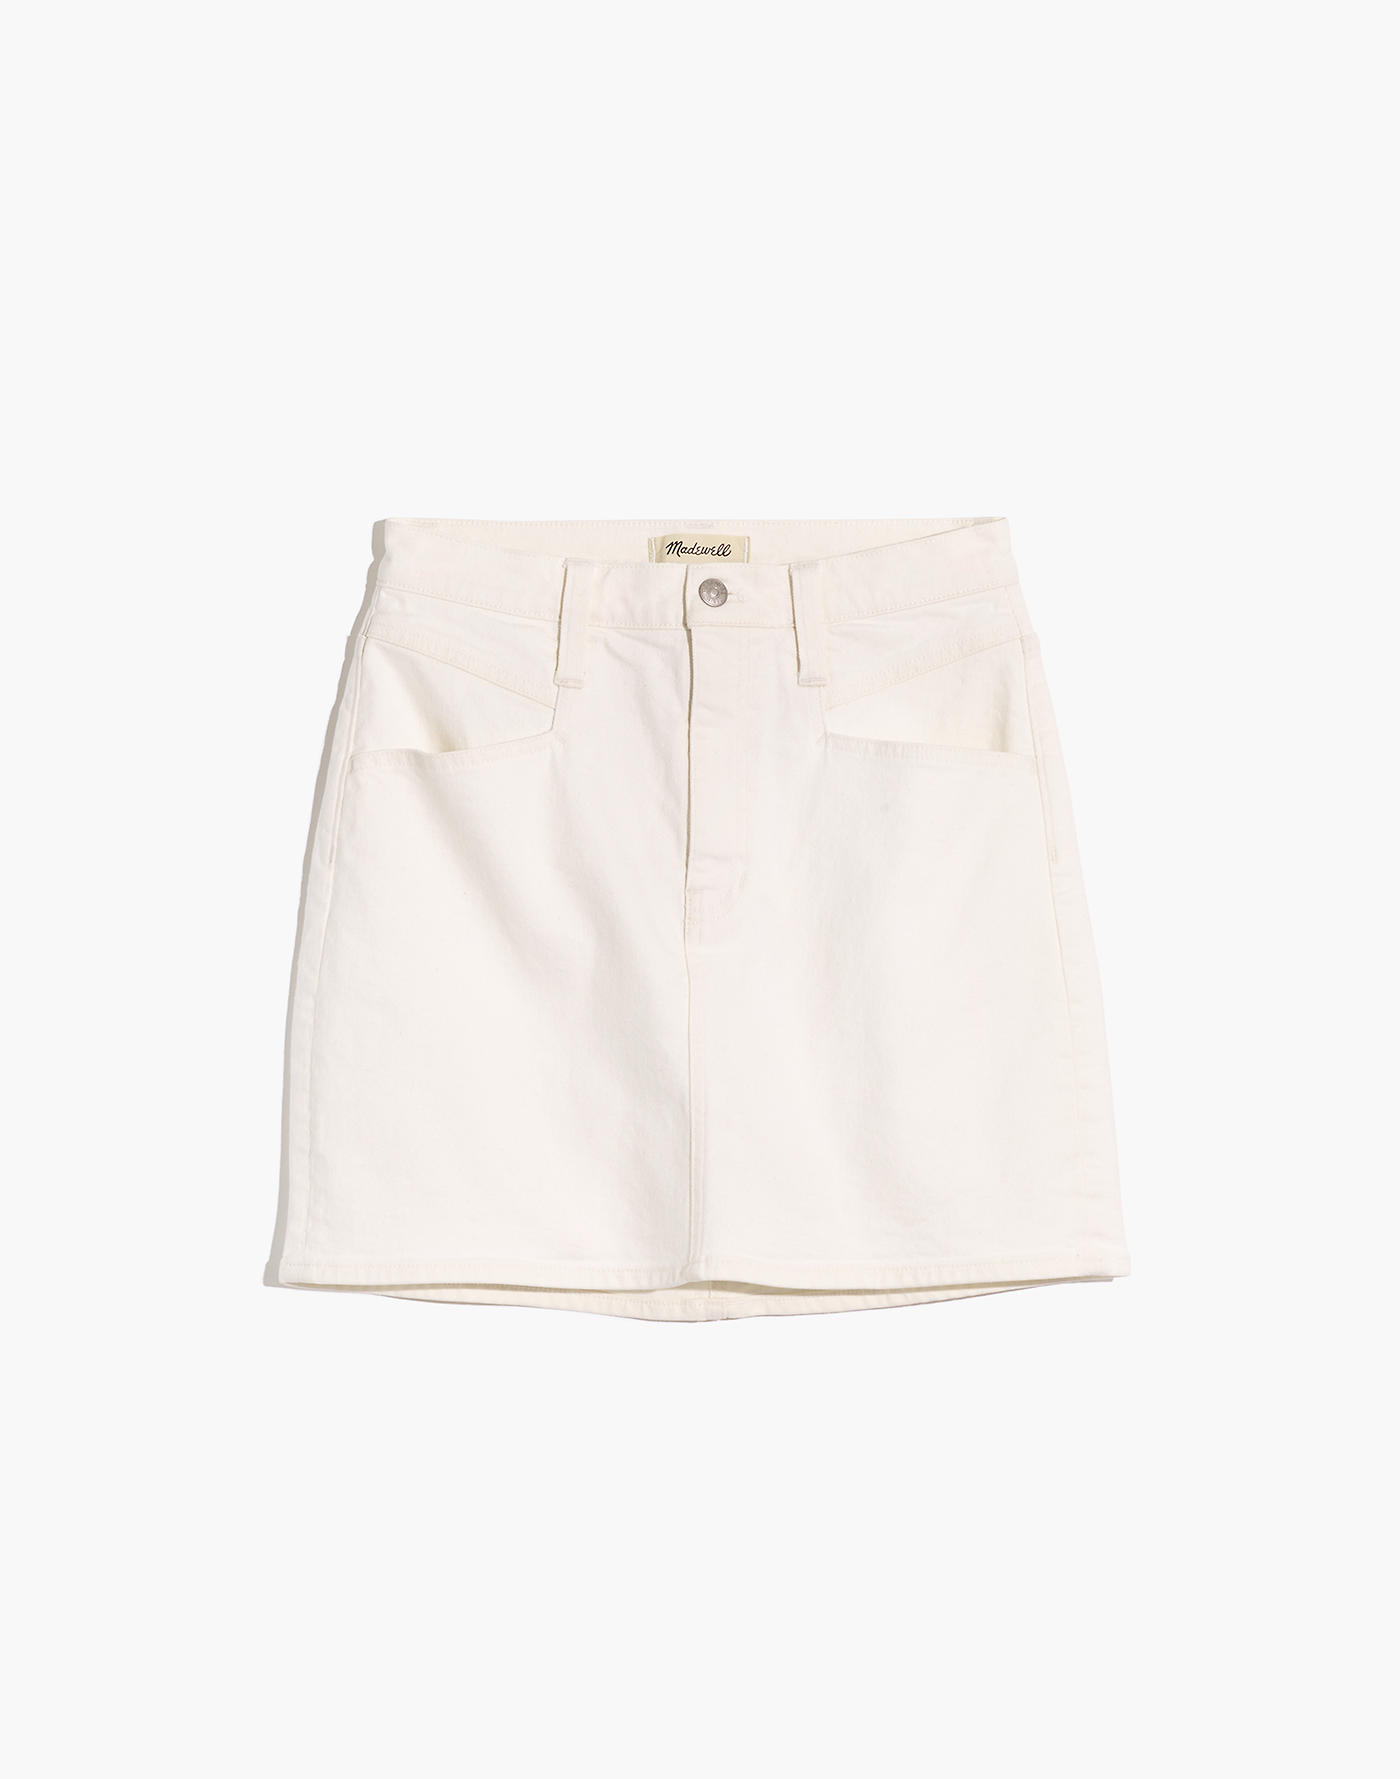 New Arrivals: Madewell J.Crew + Factory | Kelly in the City